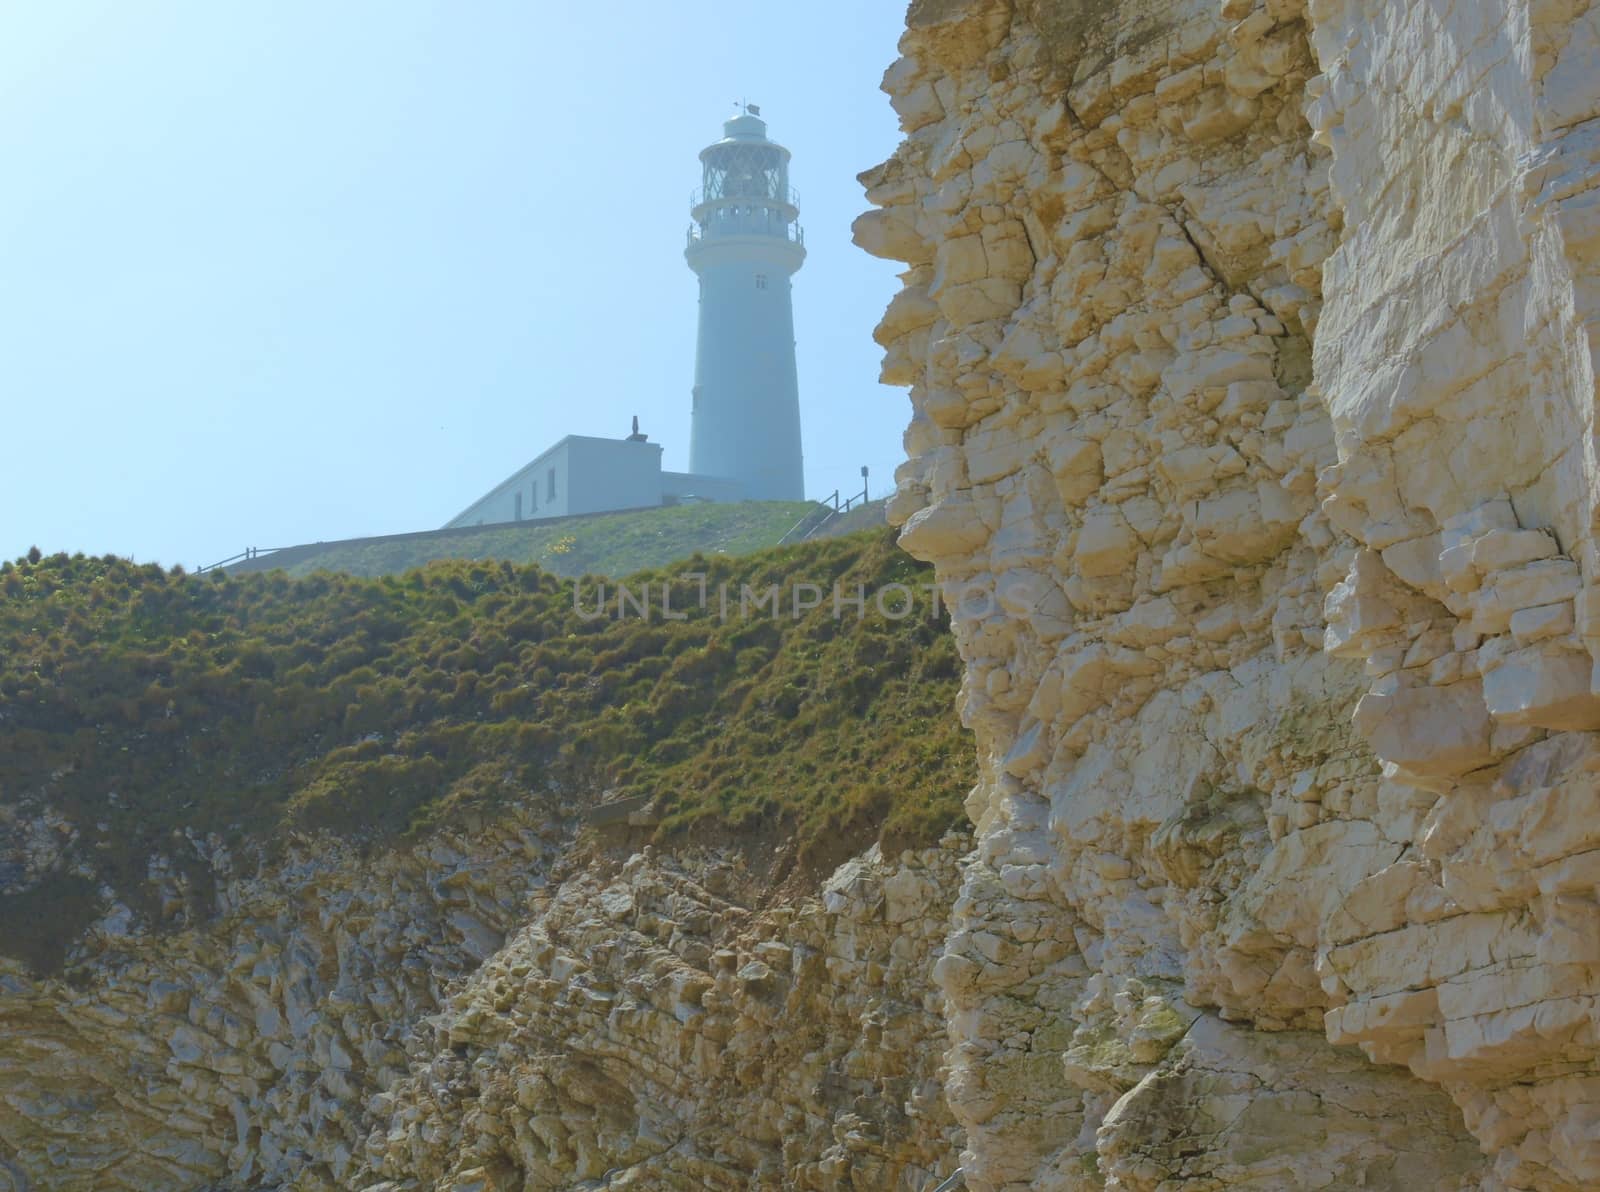 An image from a beach at Flamborough Head, showing the Lighthouse in the background.